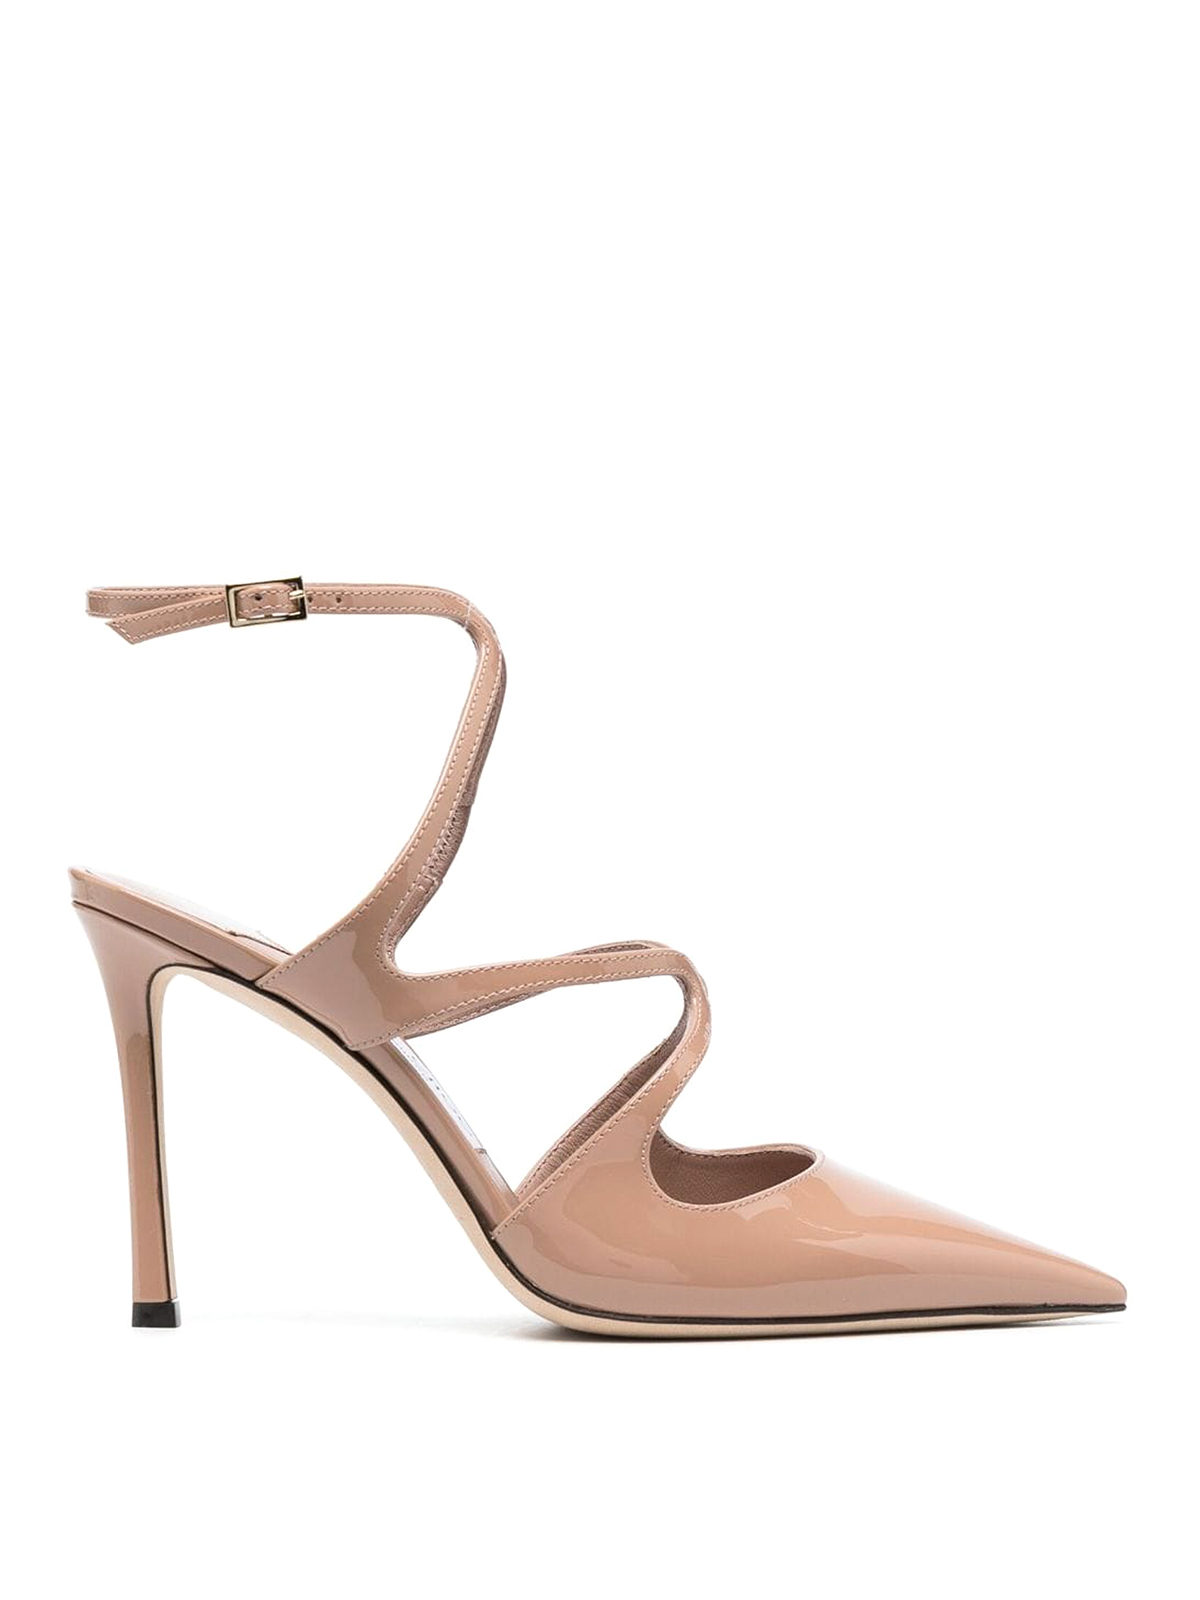 Shop Jimmy Choo Azia 95 Patent Leather Pumps In Light Pink